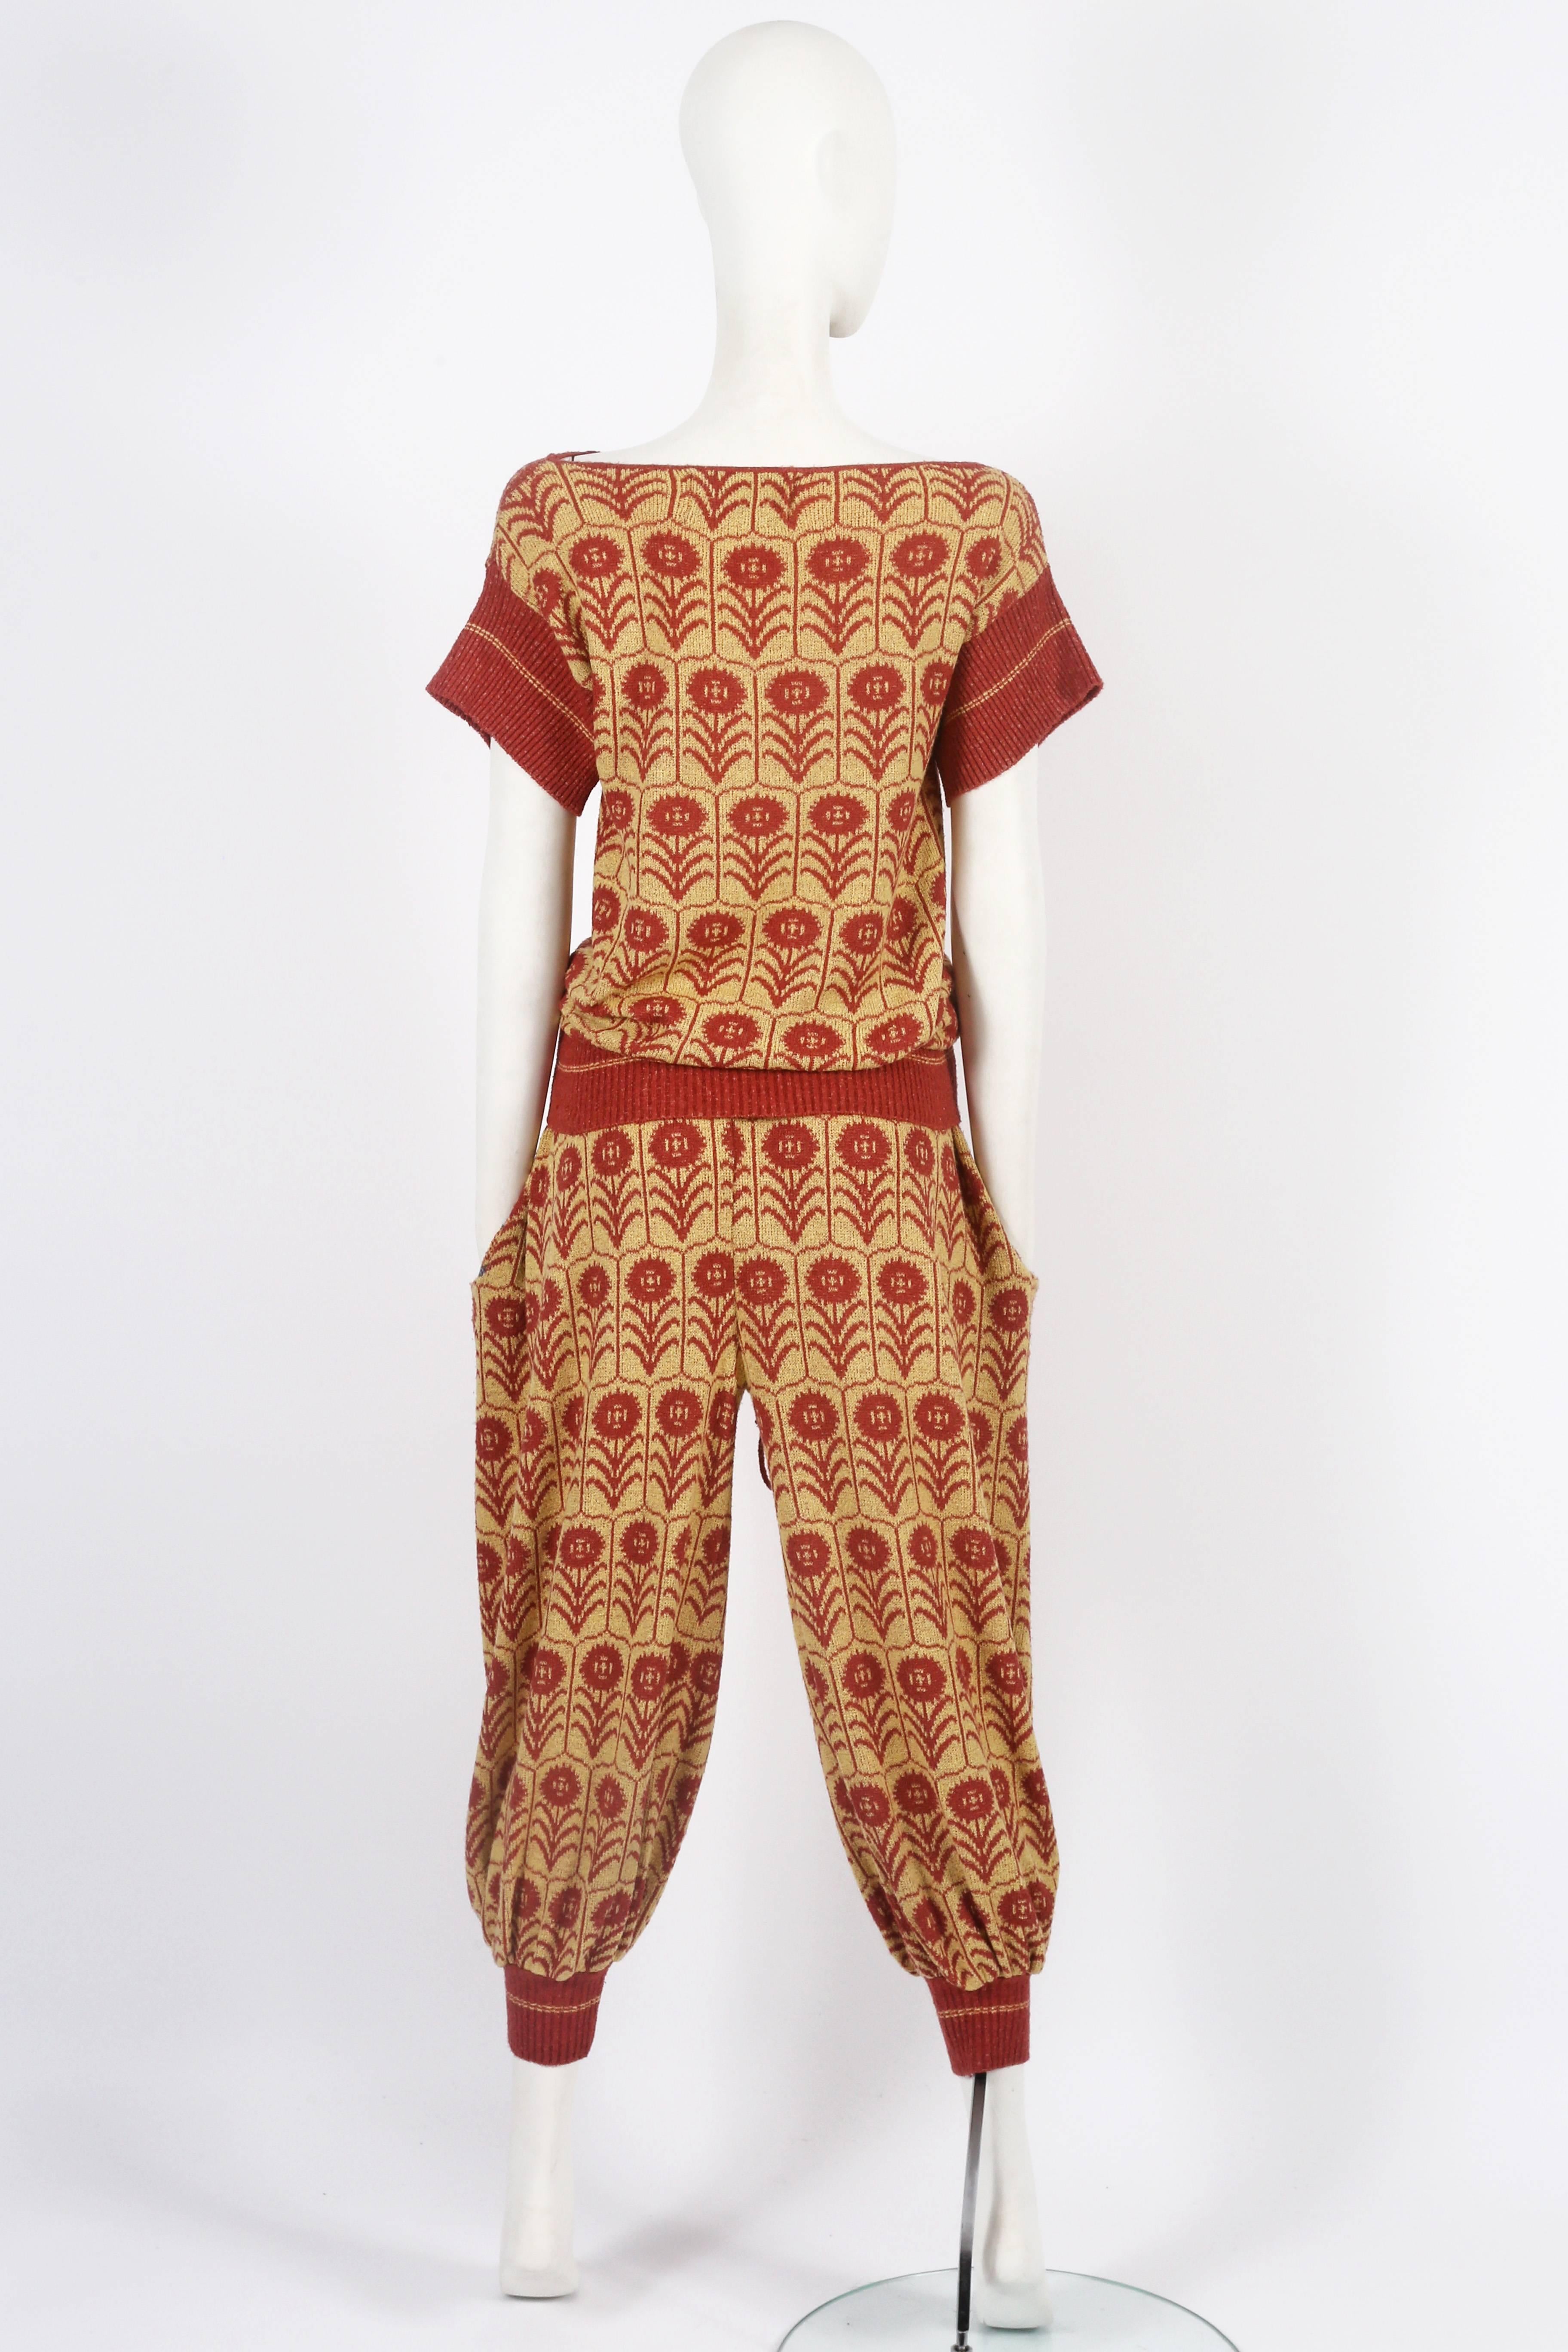 Women's Bill Gibb knitted pant suit, circa 1970s